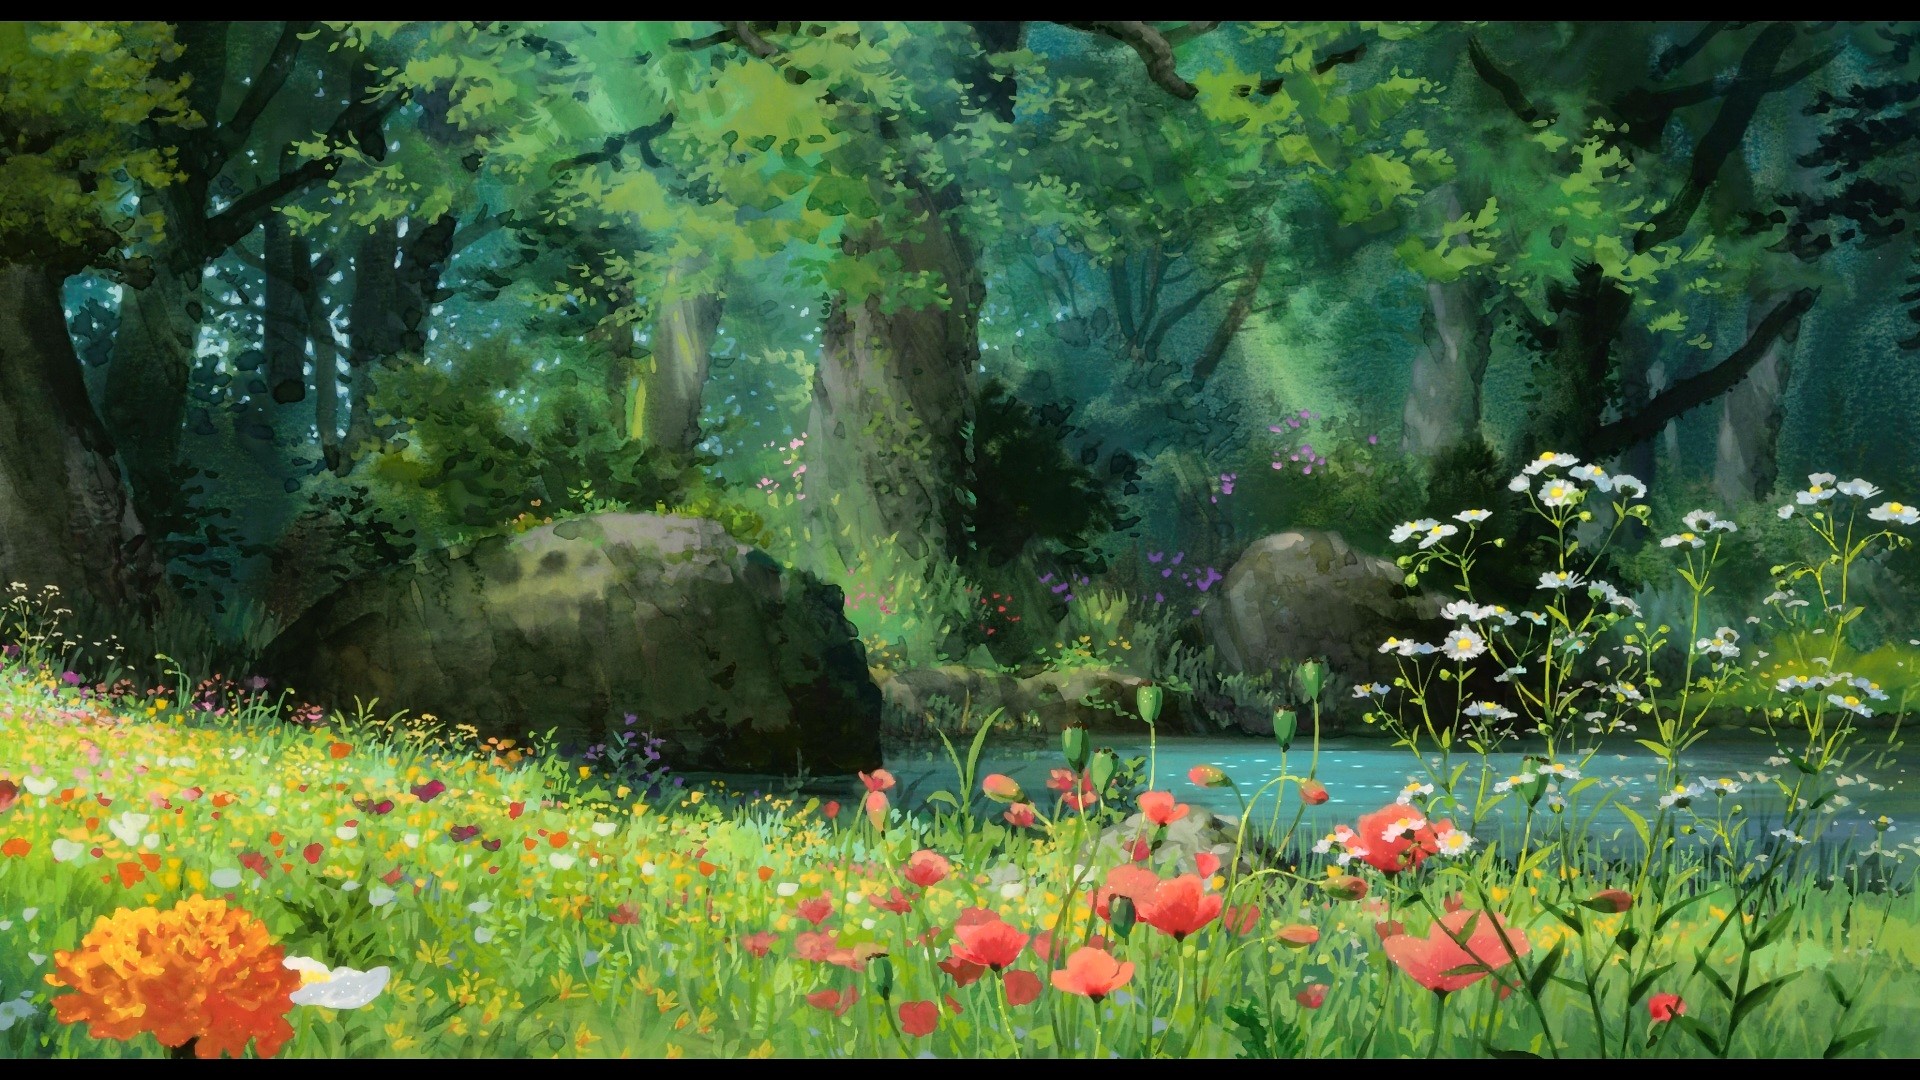 Anime Forest HD Wallpaper 1920x1080 | Studio ghibli background, Anime  scenery, Landscape poster